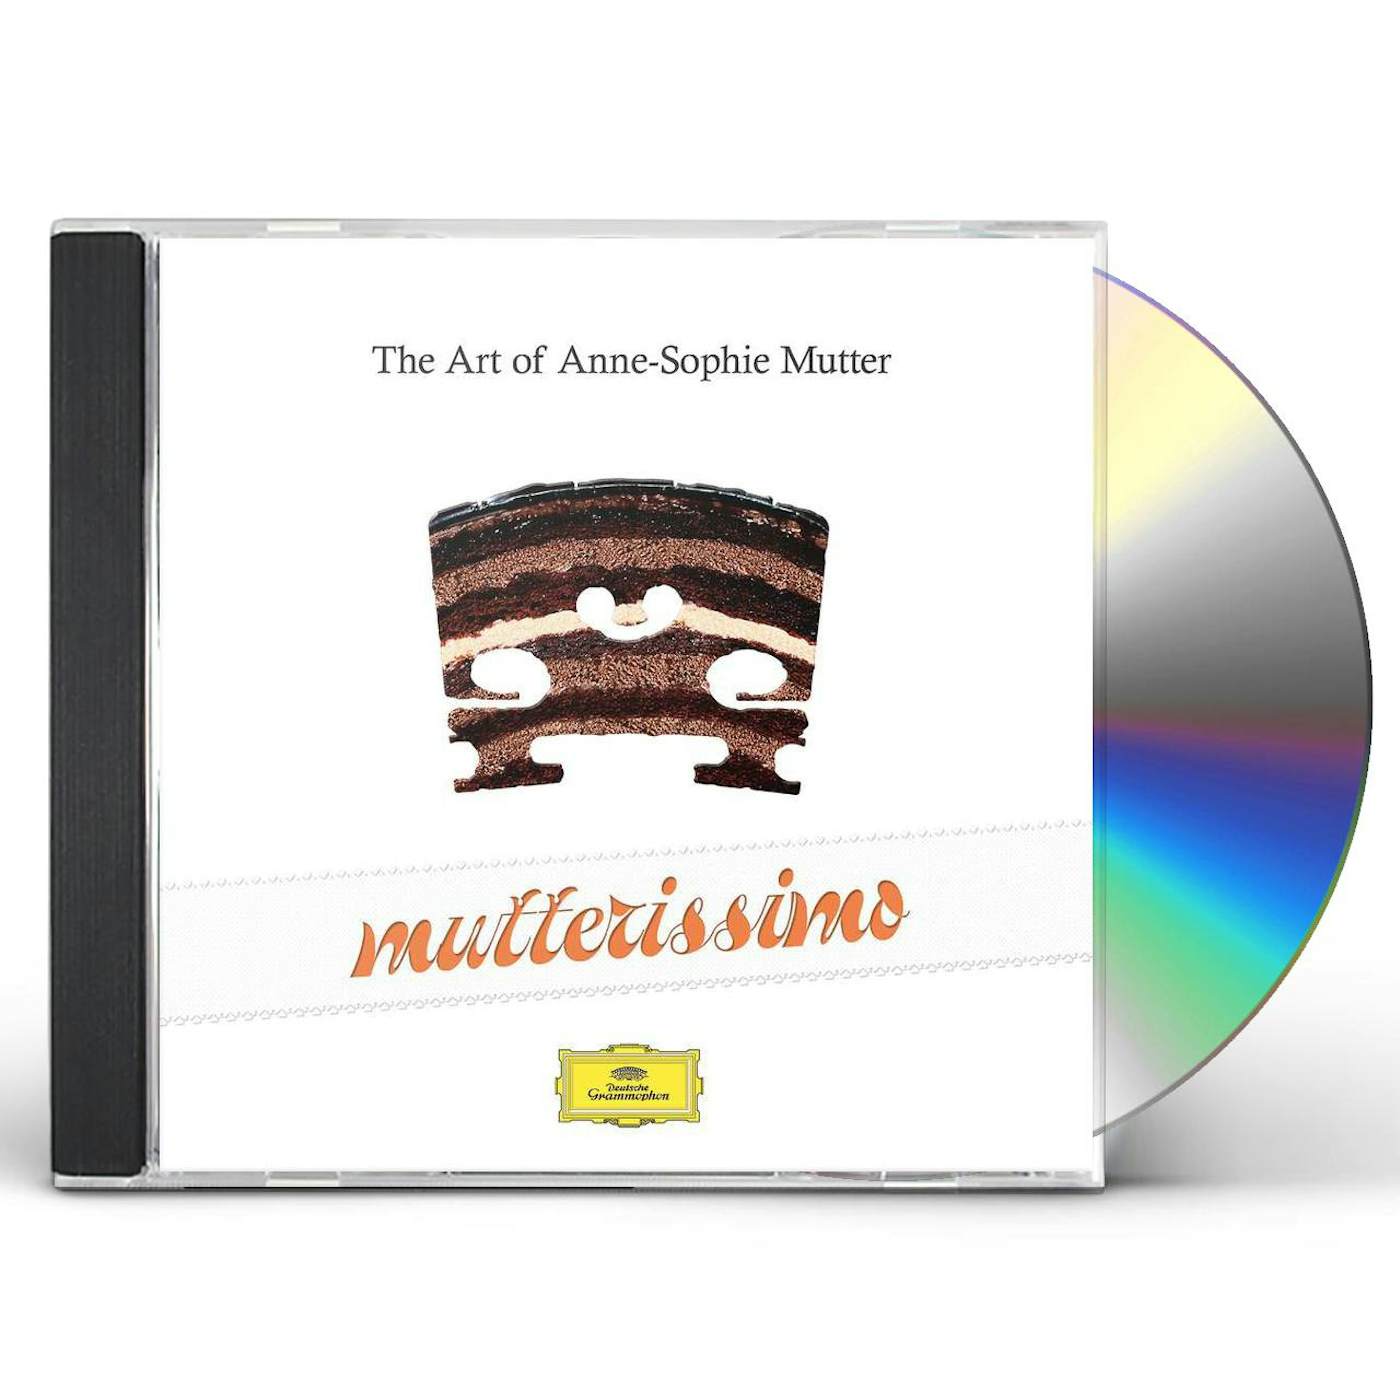 Mutterissimo - The Art Of Anne-Sophie Mutter (2 CD) CD